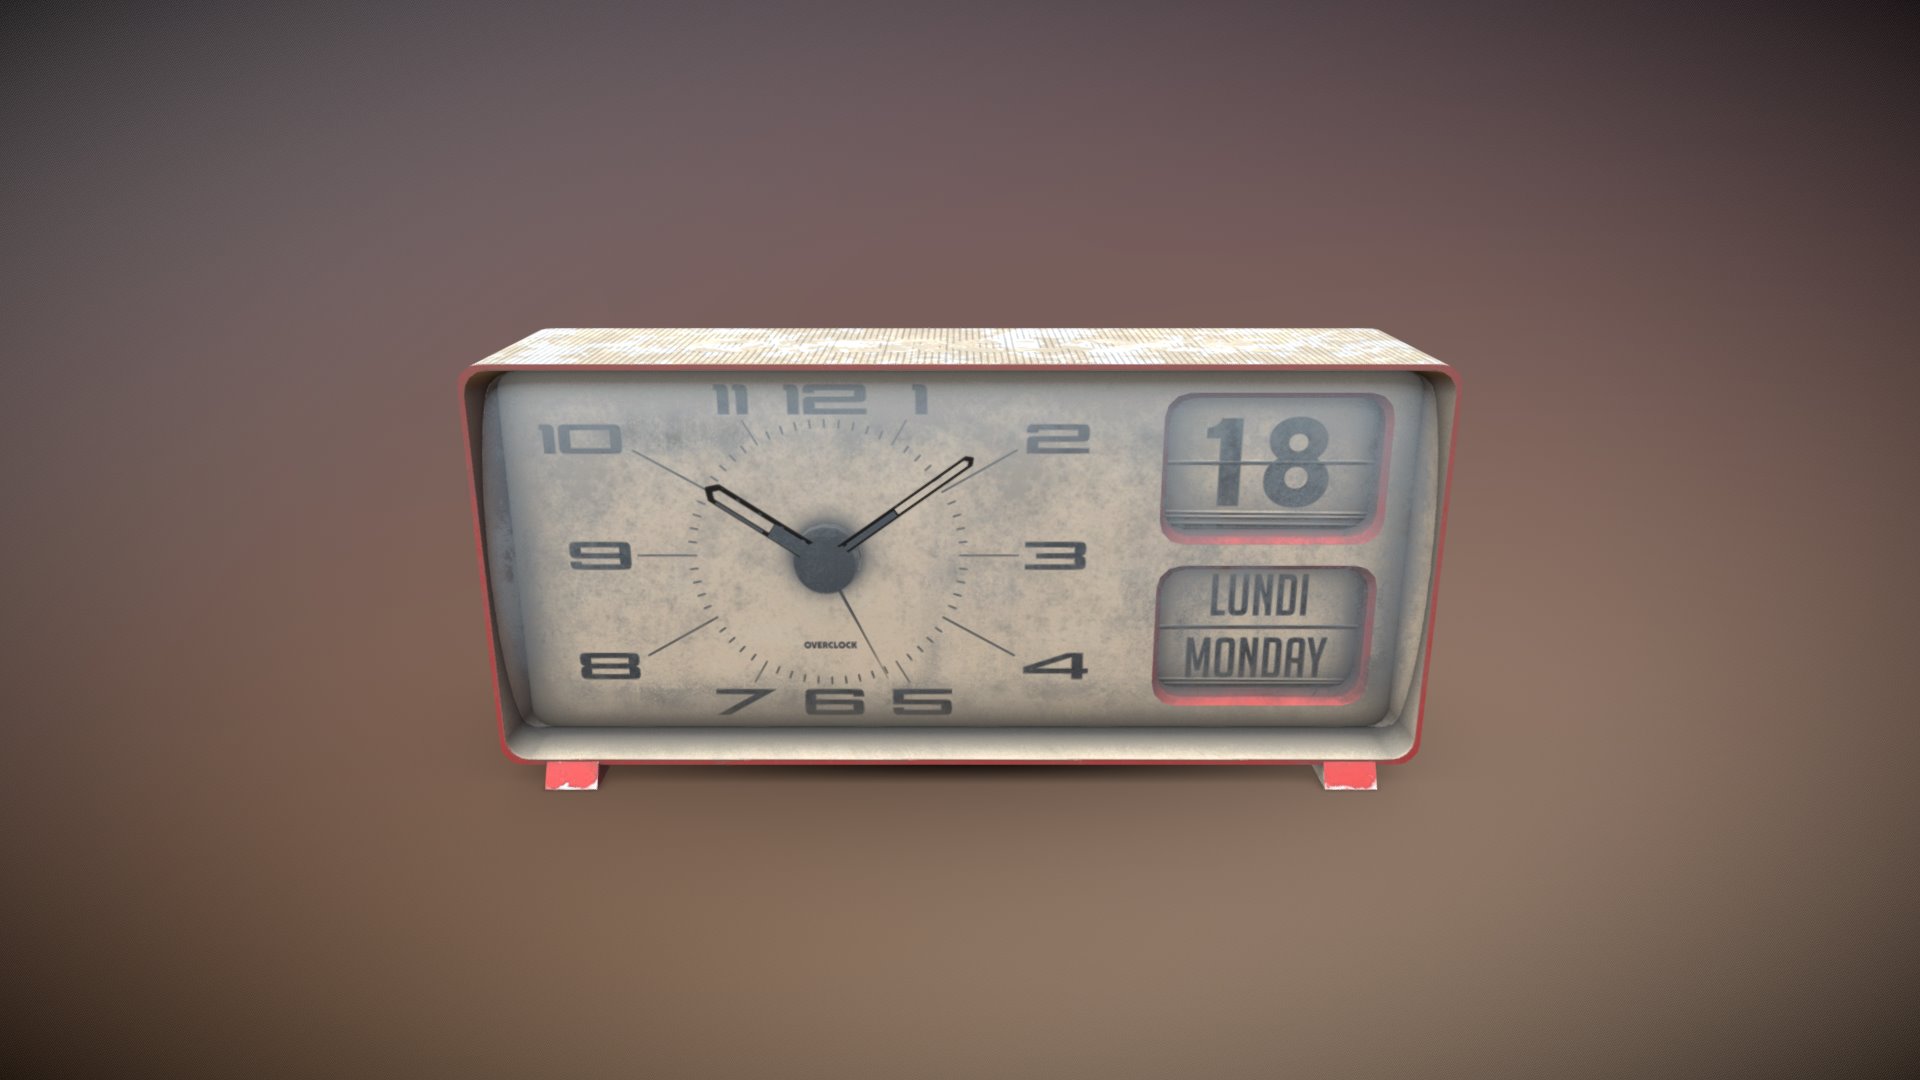 3D model Dirty desktop flipclock 19 of 20 - This is a 3D model of the Dirty desktop flipclock 19 of 20. The 3D model is about a clock on a wall.